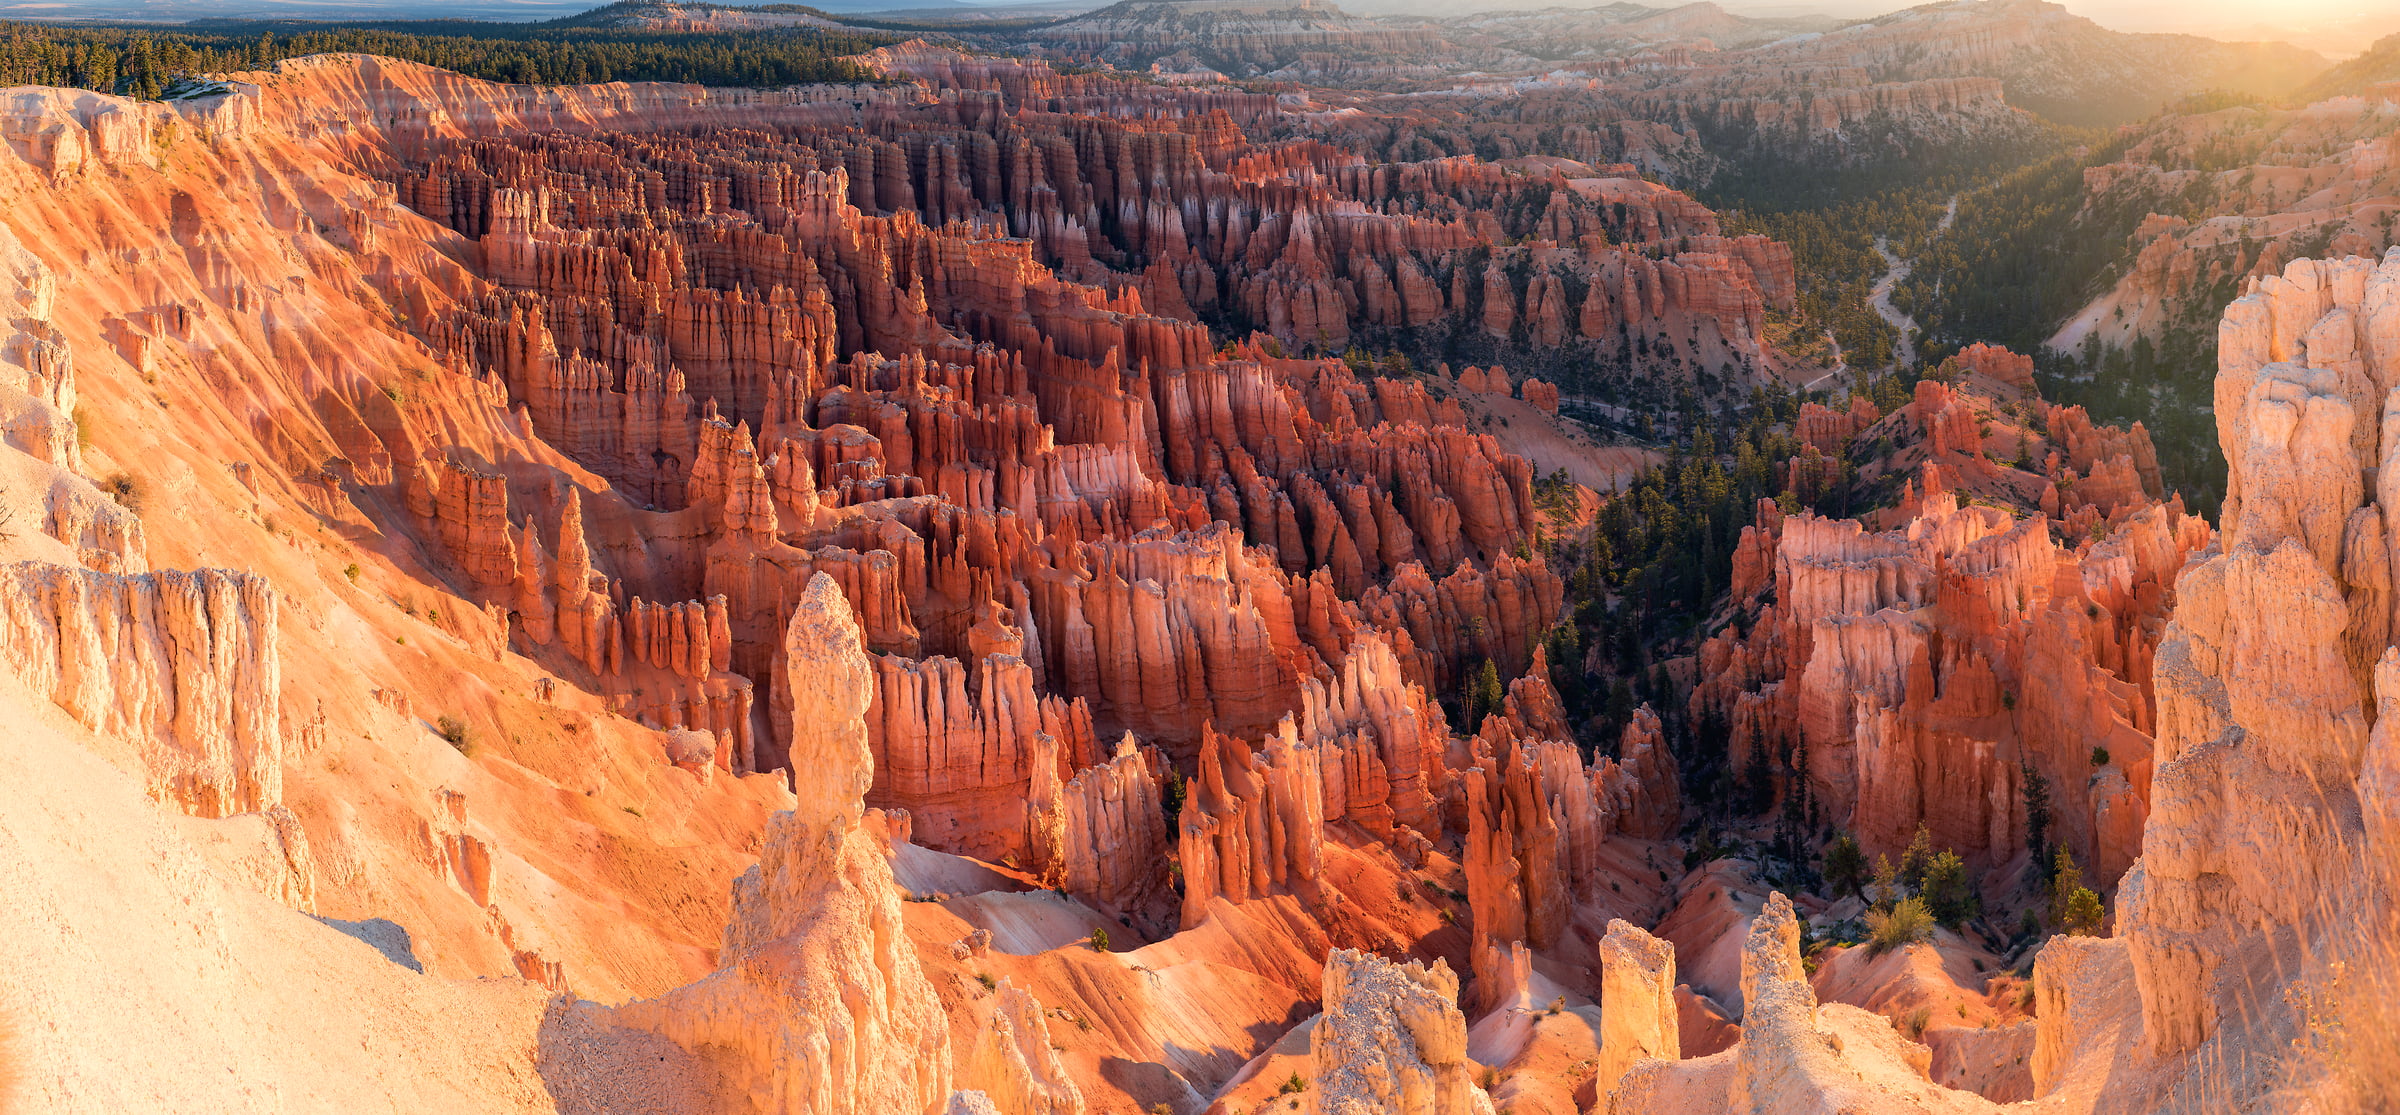 547 megapixels! A very high resolution, large-format VAST photo print of geological formations; landscape photograph created by Jim Tarpo in Bryce Canyon, Utah